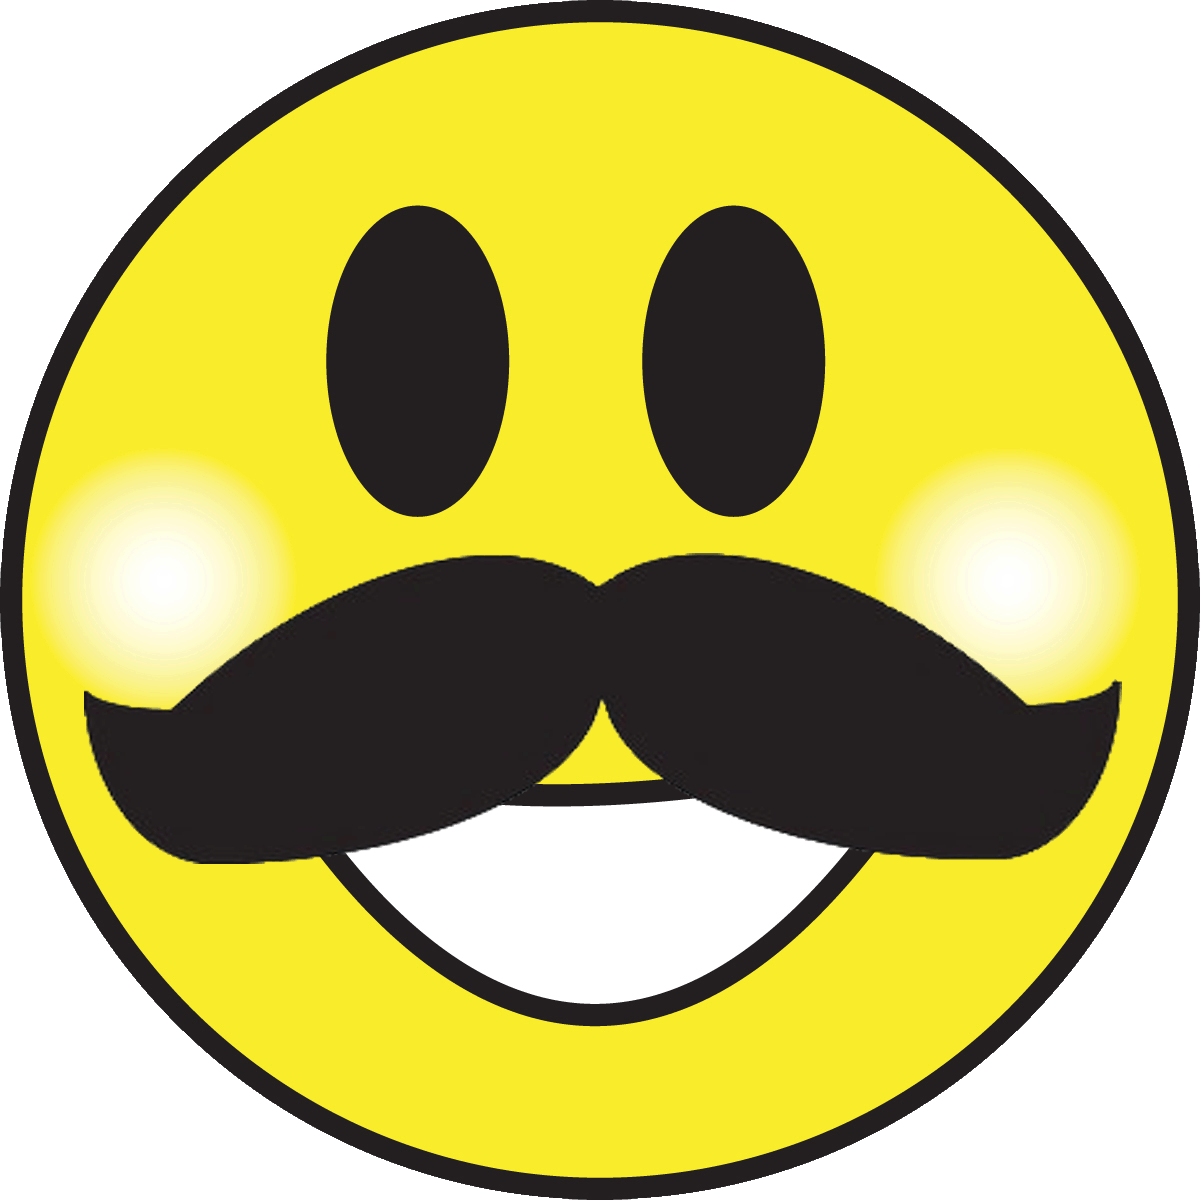 Smiley clipart logo. Could you add faces